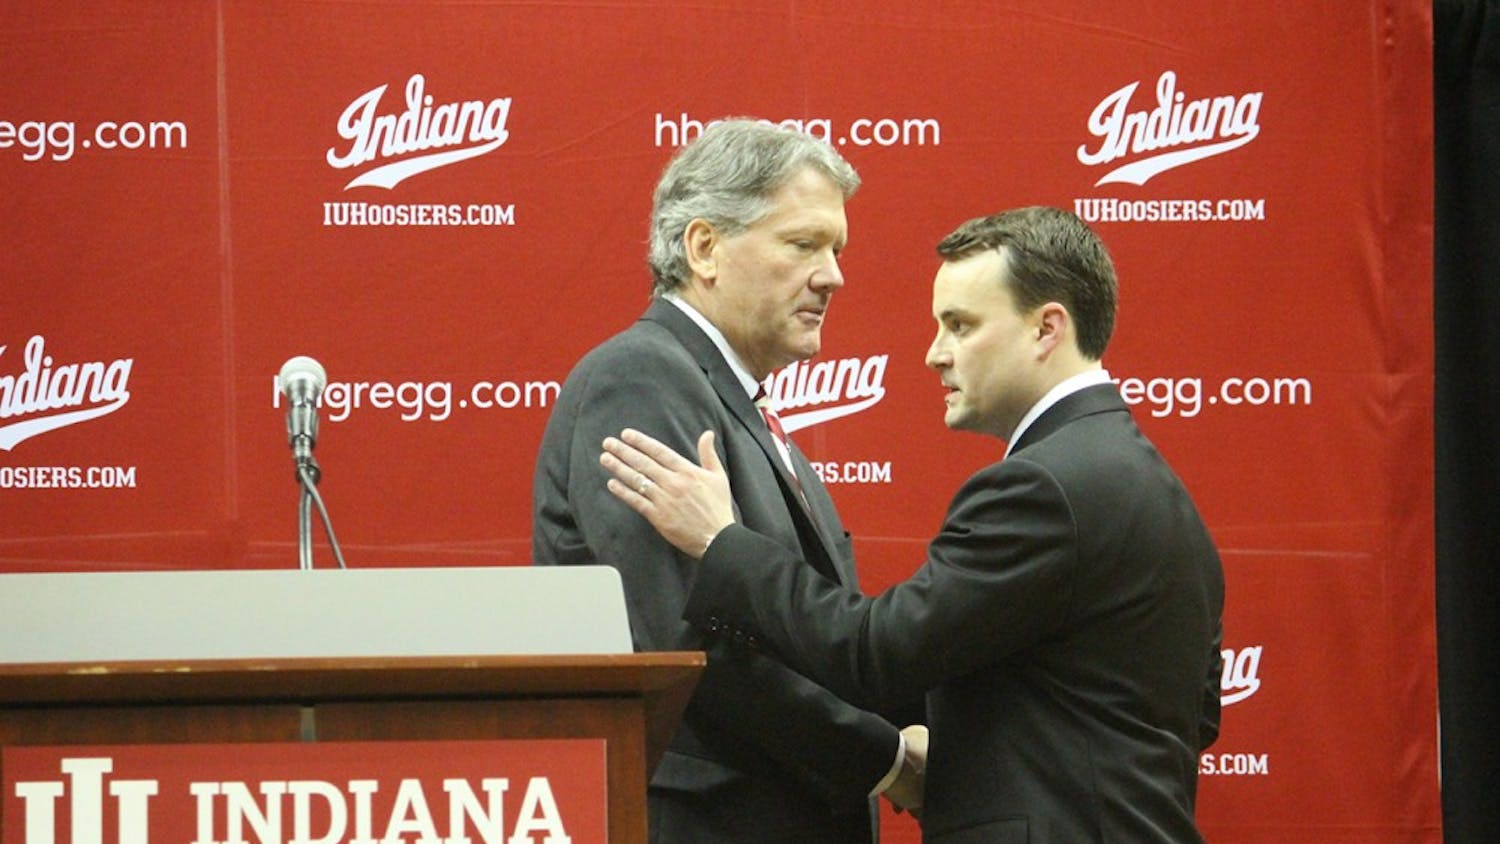 IU Coach Archie Miller and IU Athletics Director Fred Glass shake hands after the press conference to announce Miller's hiring.